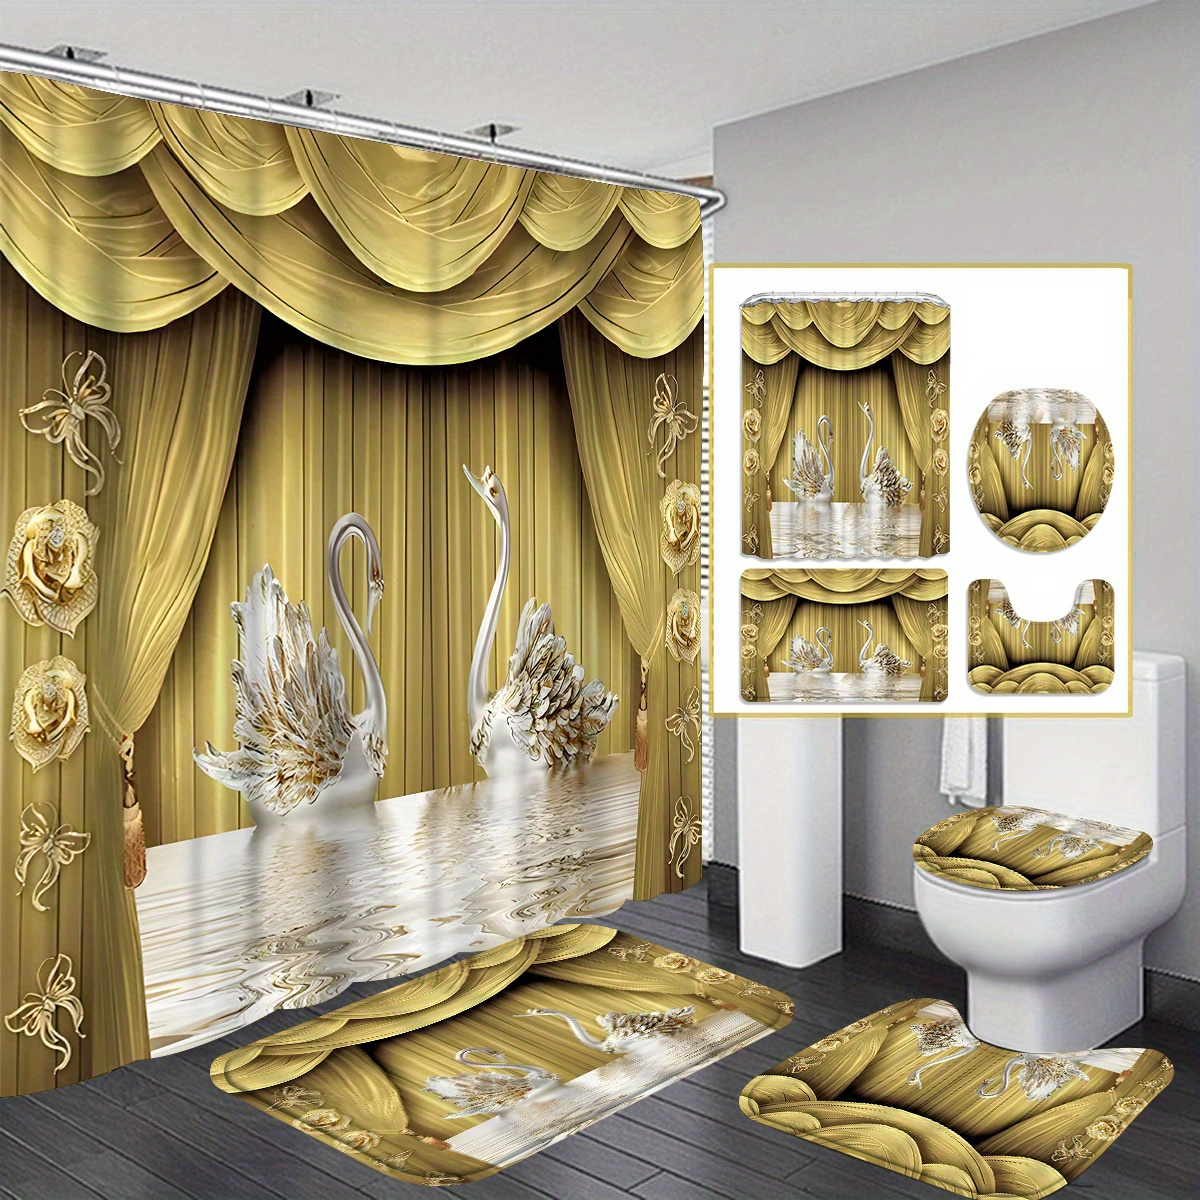 

4pcs Curtains And Shower Curtain Gift Modern Home Bathroom Decoration Curtain And Toilet Floor Mat 3-piece Set With 12 Shower Curtain Hooks